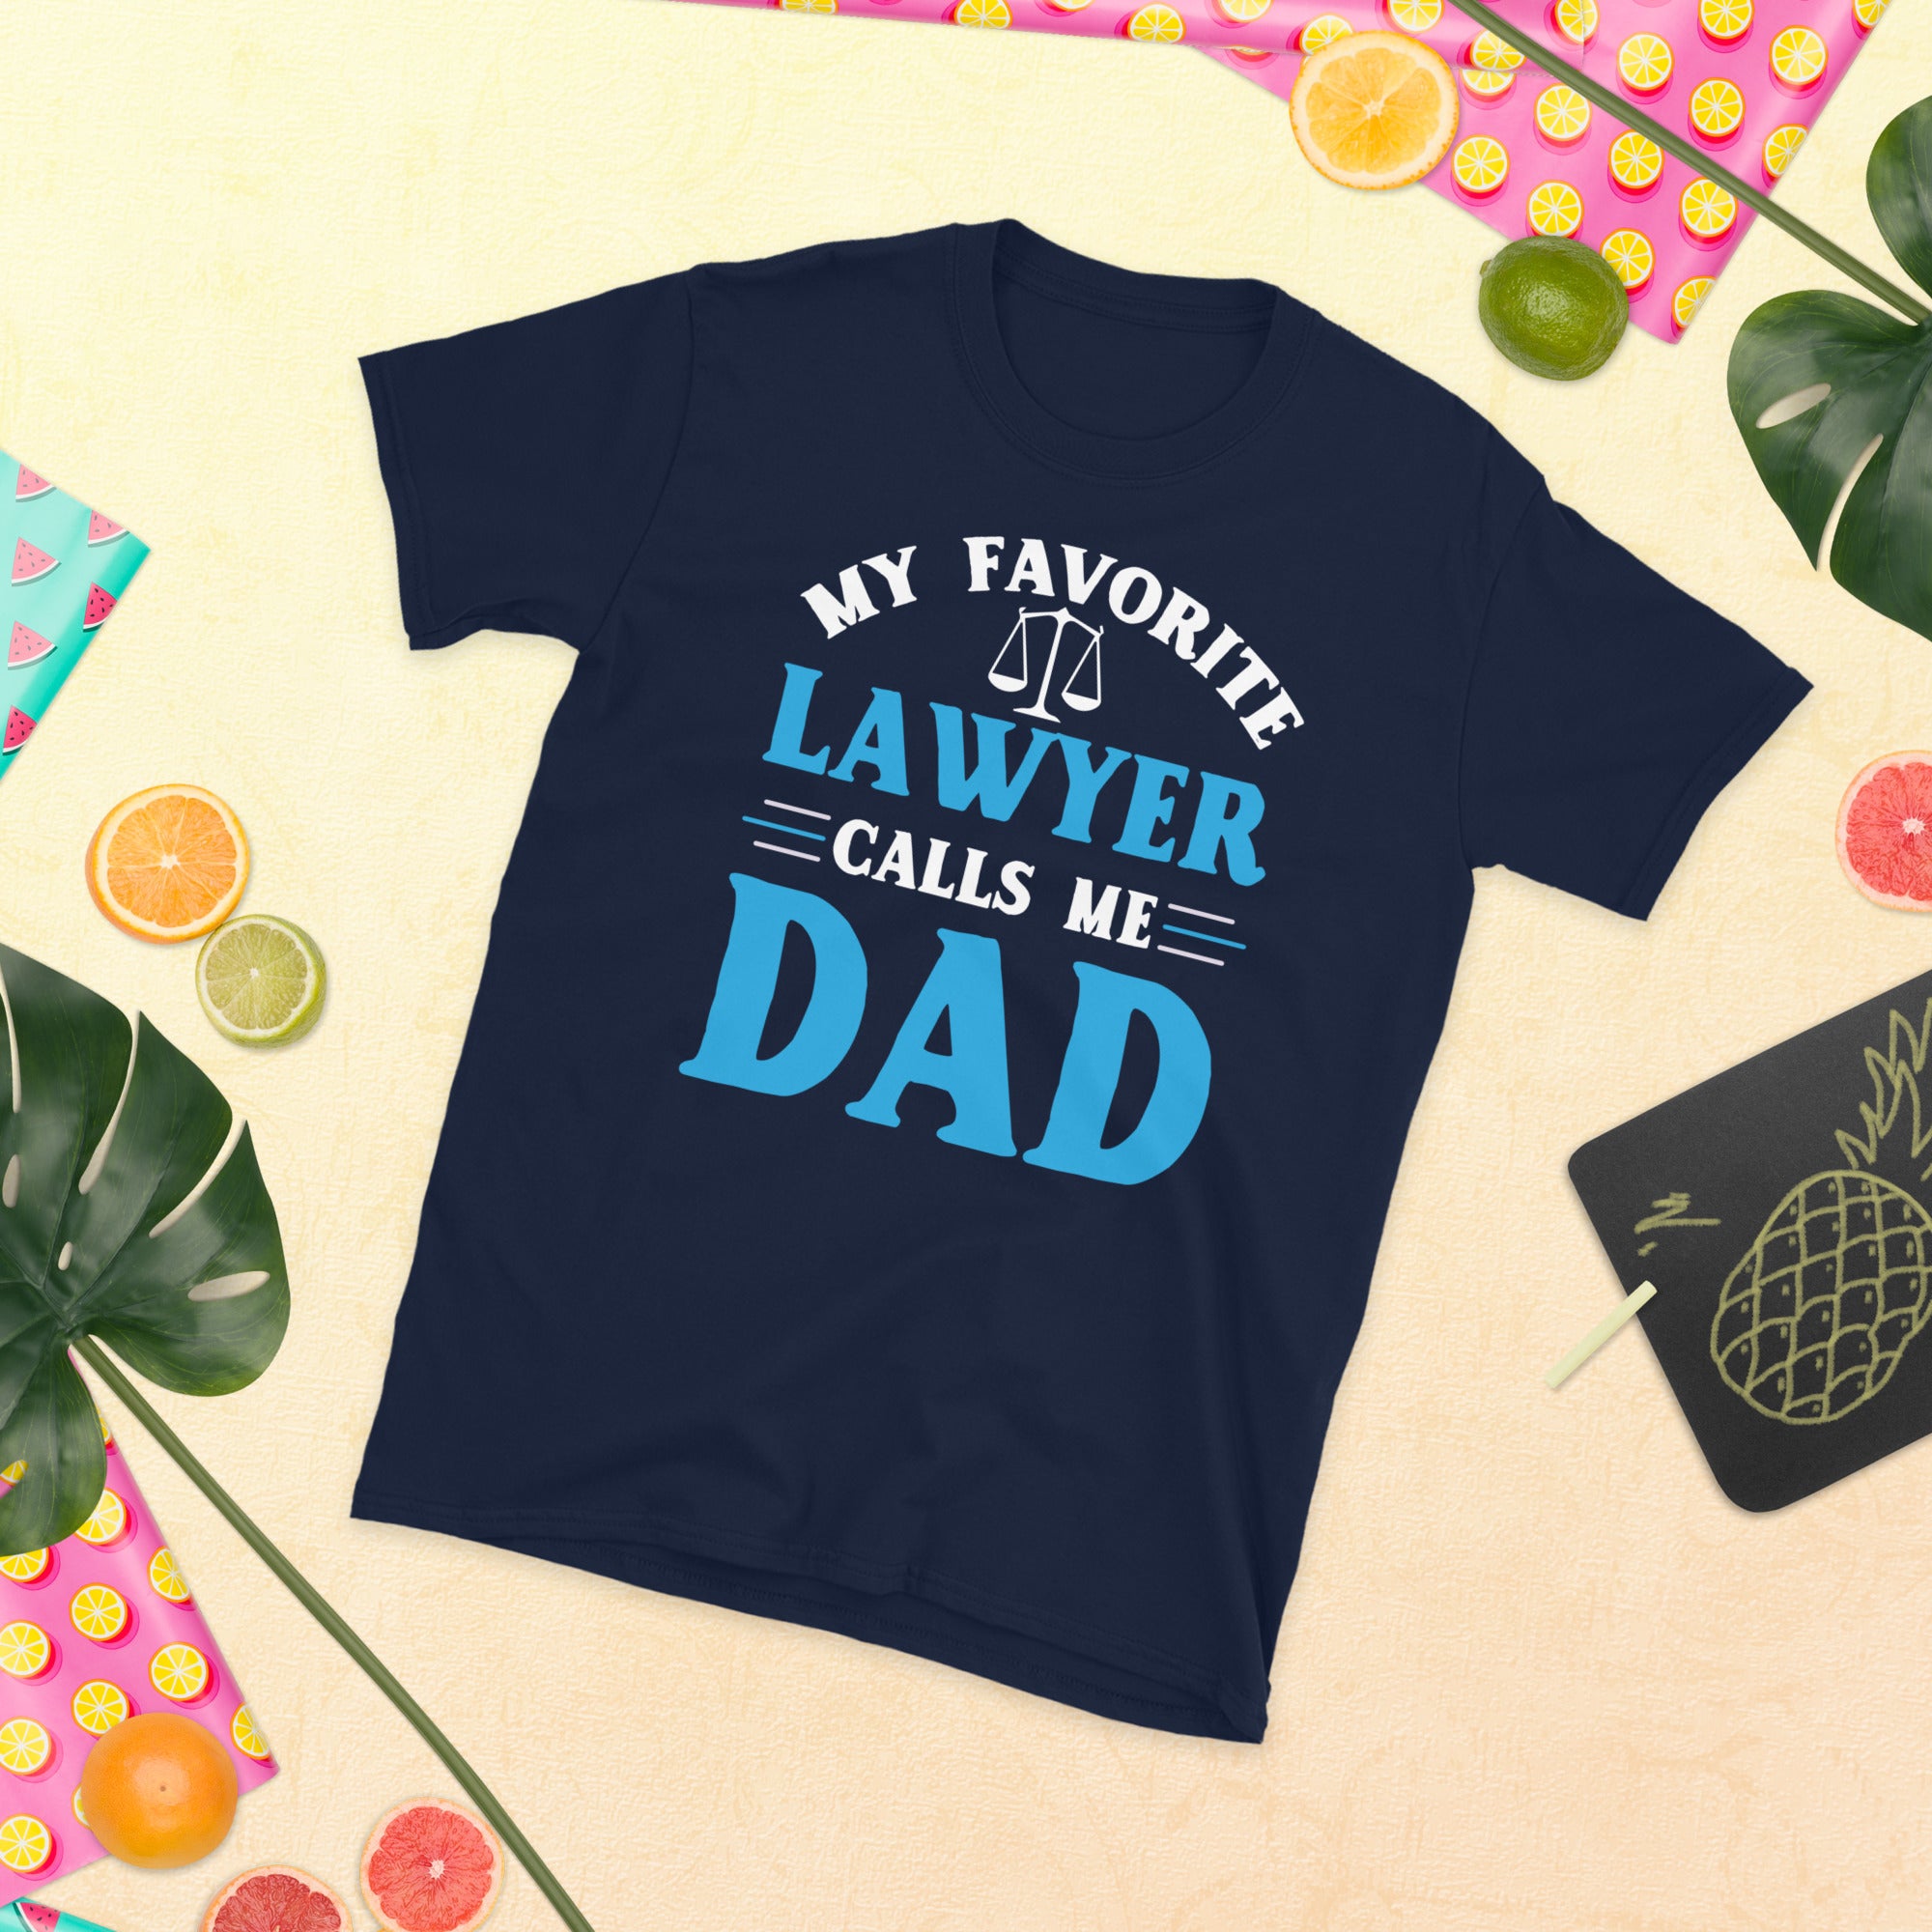 My favorite lawyer calls me dad, Funny Lawyer Gift, Lawyer Shirt, Dad Lawyer T Shirt, Dad of a Lawyer, Attorney Shirt, Future Lawyer Shirt